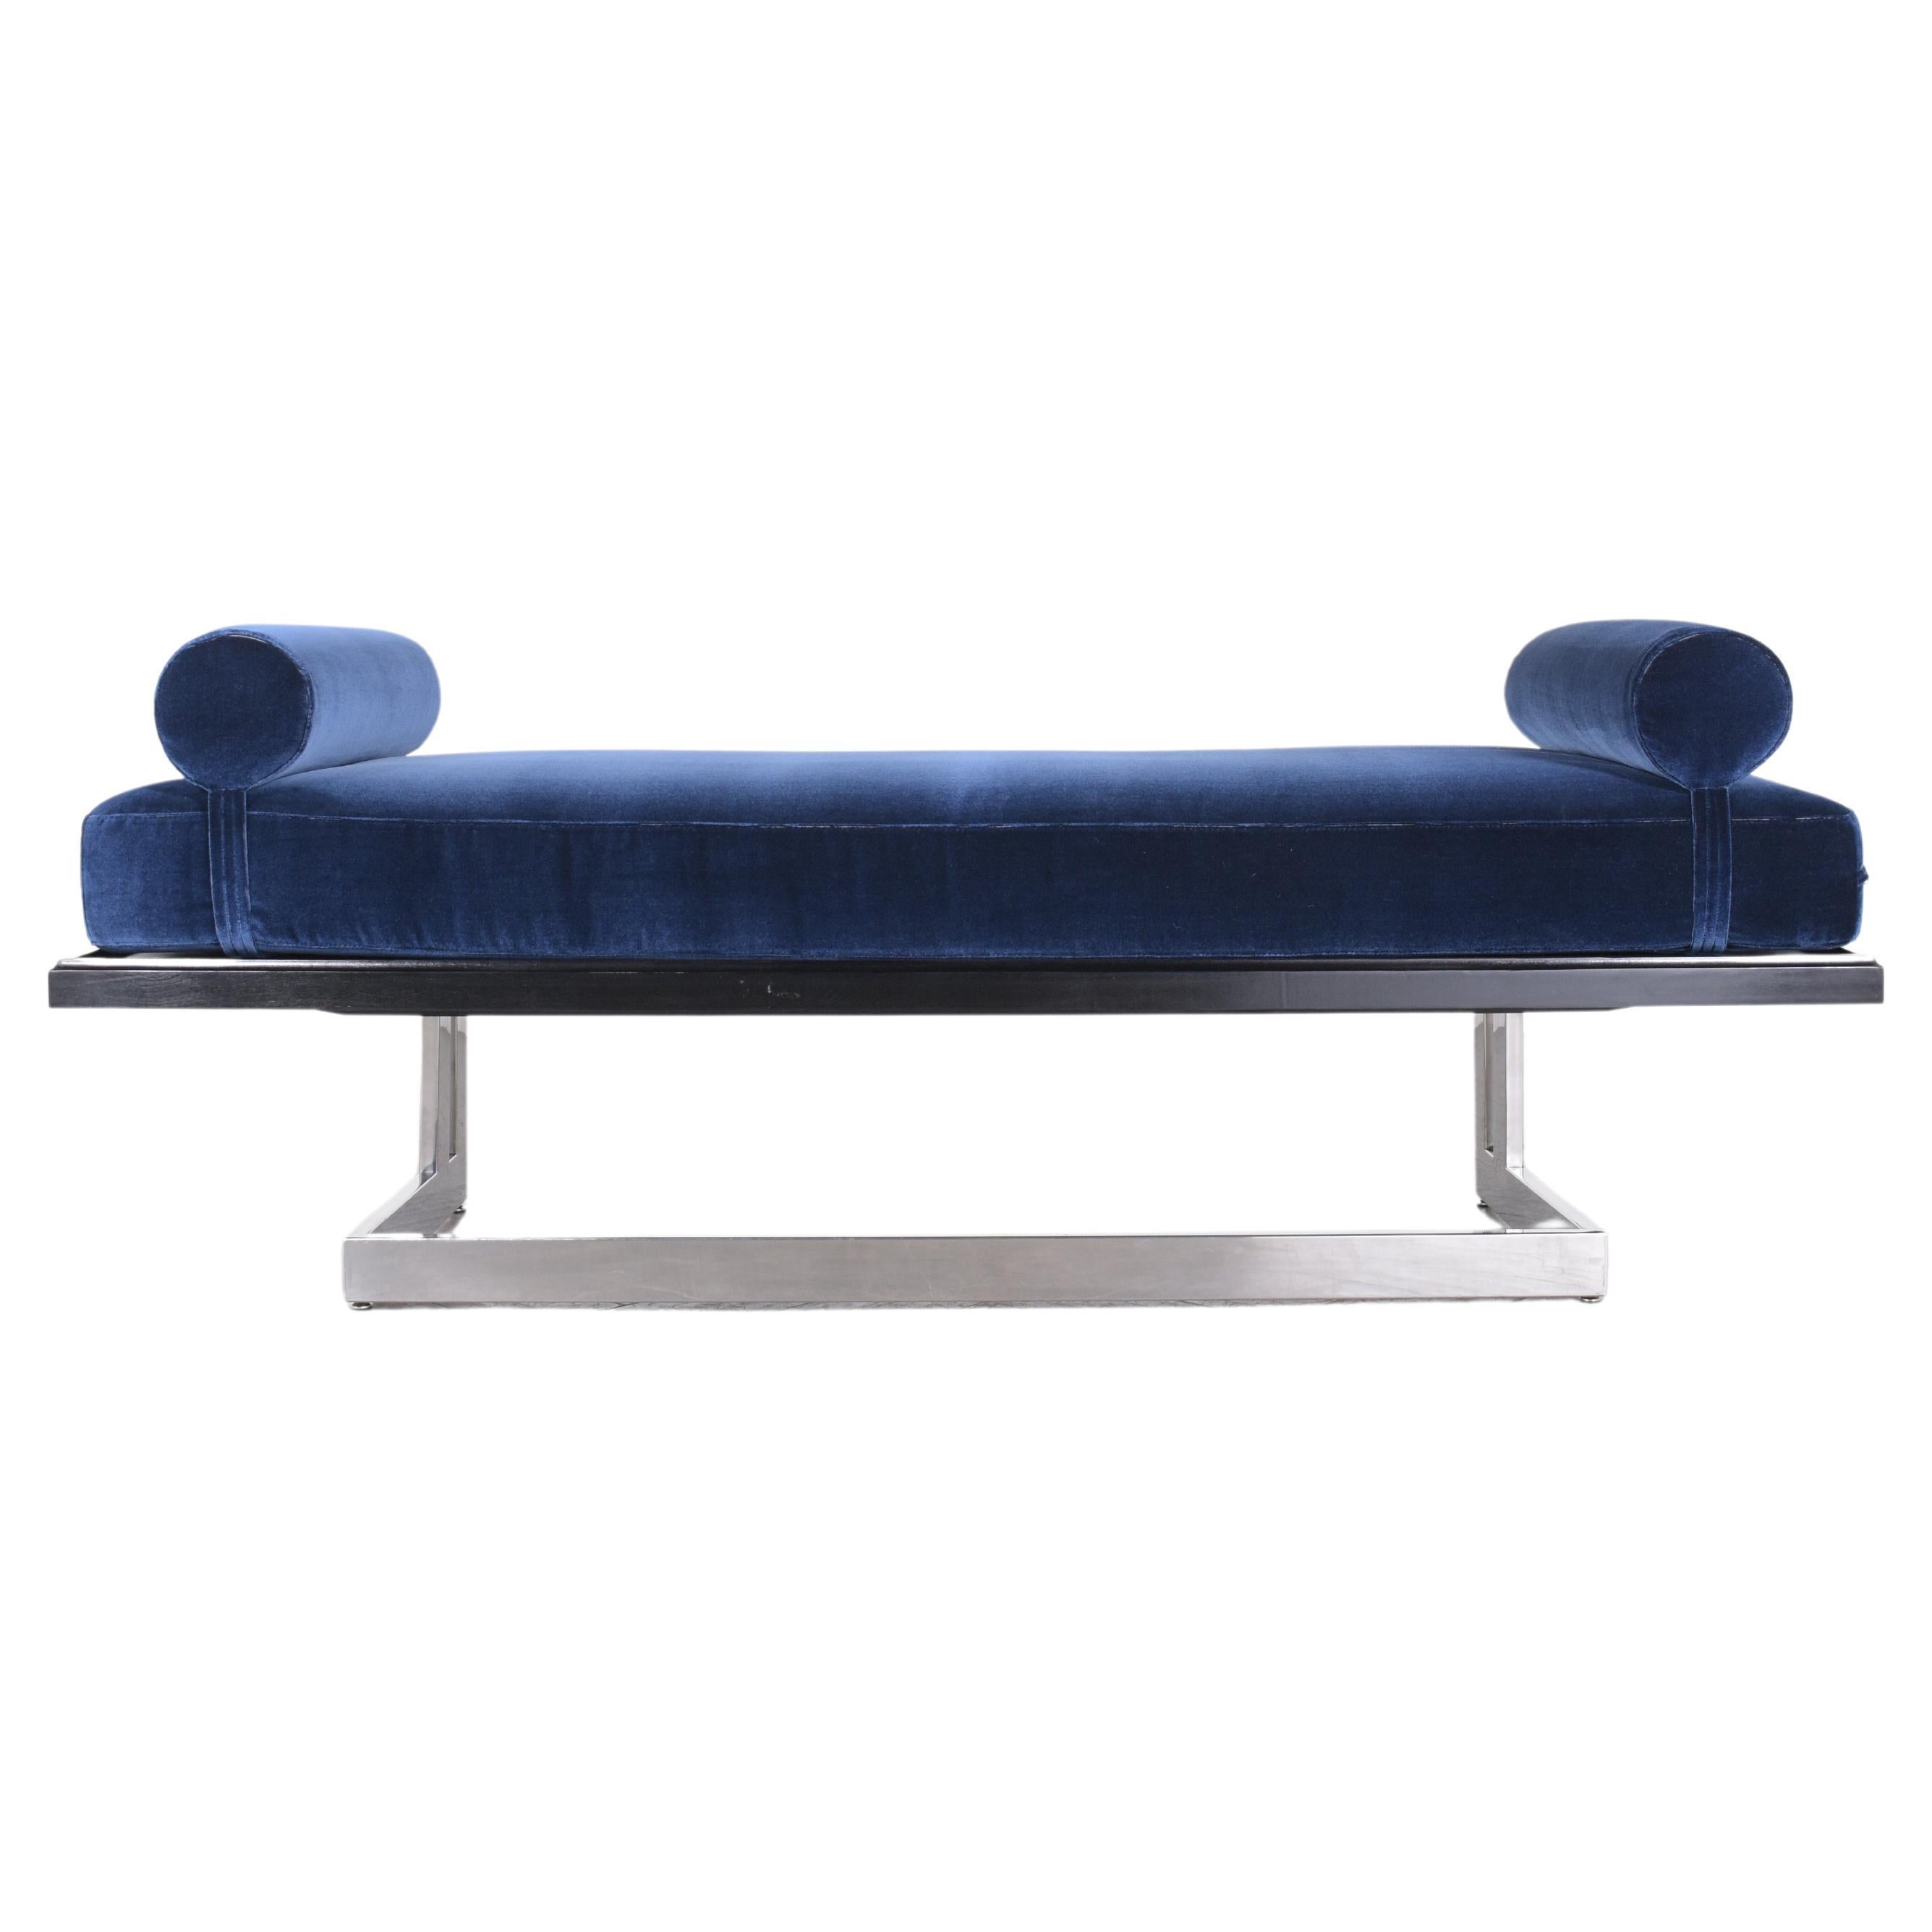 Dive into the world of mid-century aesthetics with our expertly restored Mid-Century Modern Blue Velvet Sofa Bed. Our skilled craftsmen have poured expertise into every detail, from the steel structure to the luxurious upholstery. Boasting a sleek